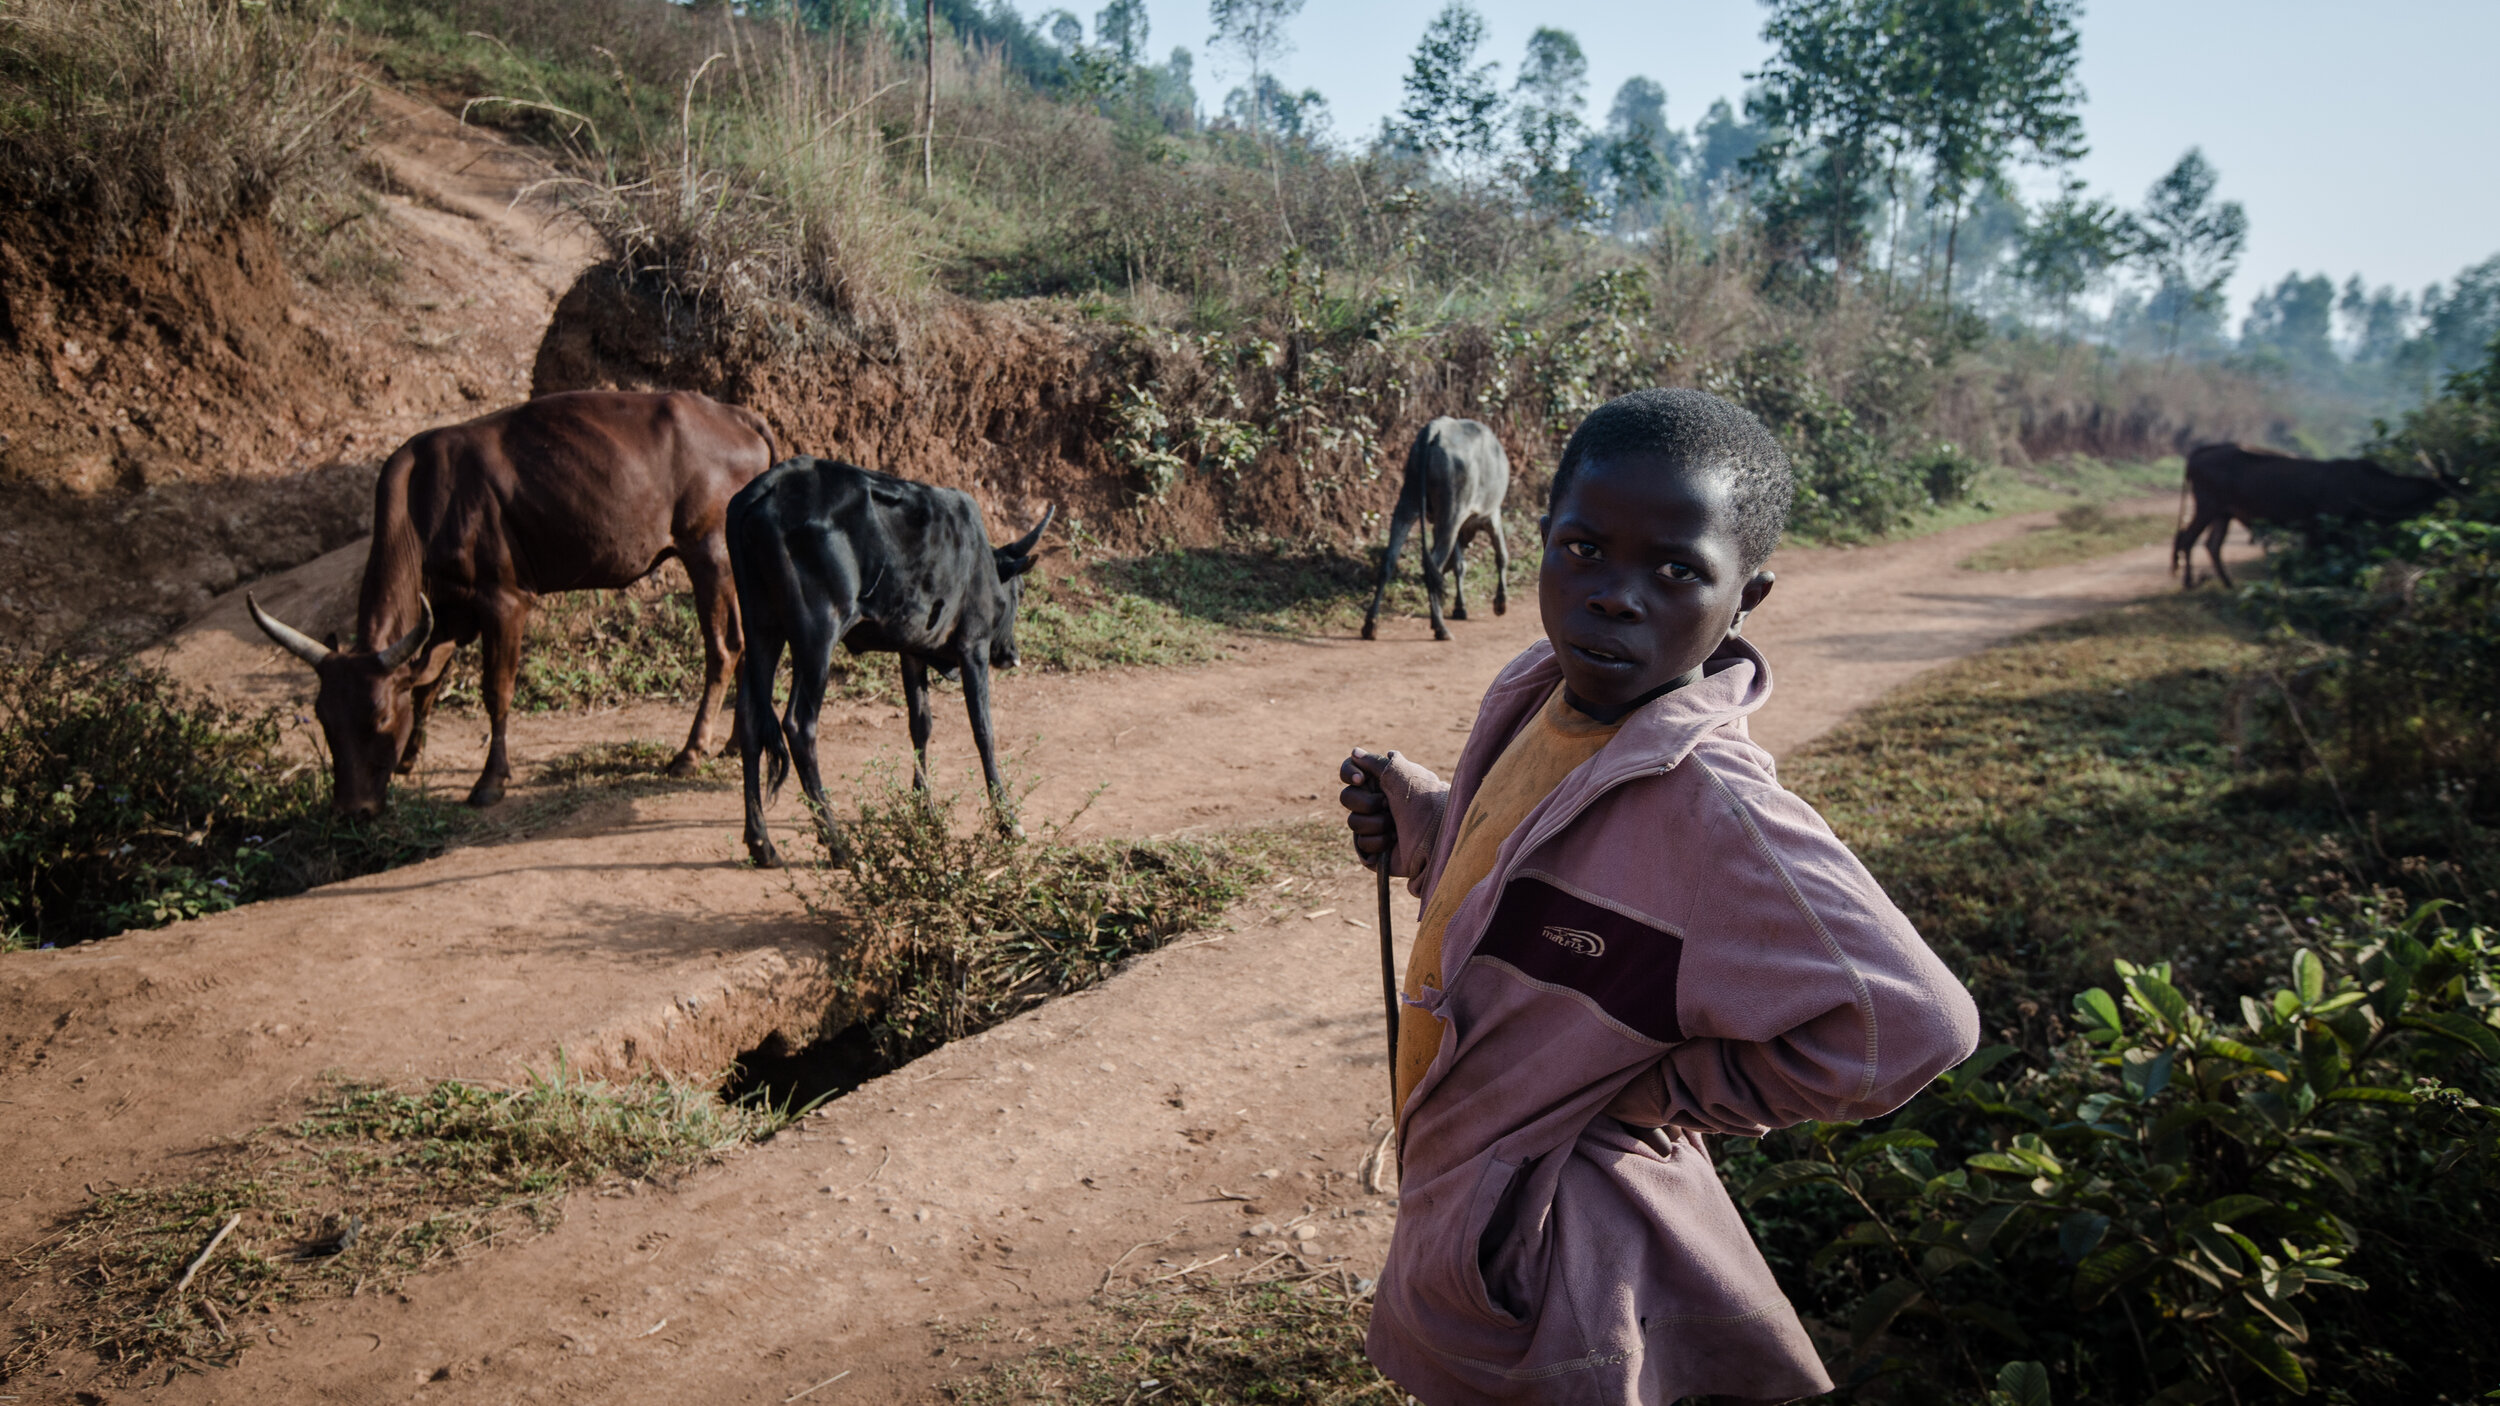  an encounter on the way up hill to Nyamurale gold mining site, on a project with TetraTech about artisanal gold mining in The Democratic Republic of Congo in August 2018 